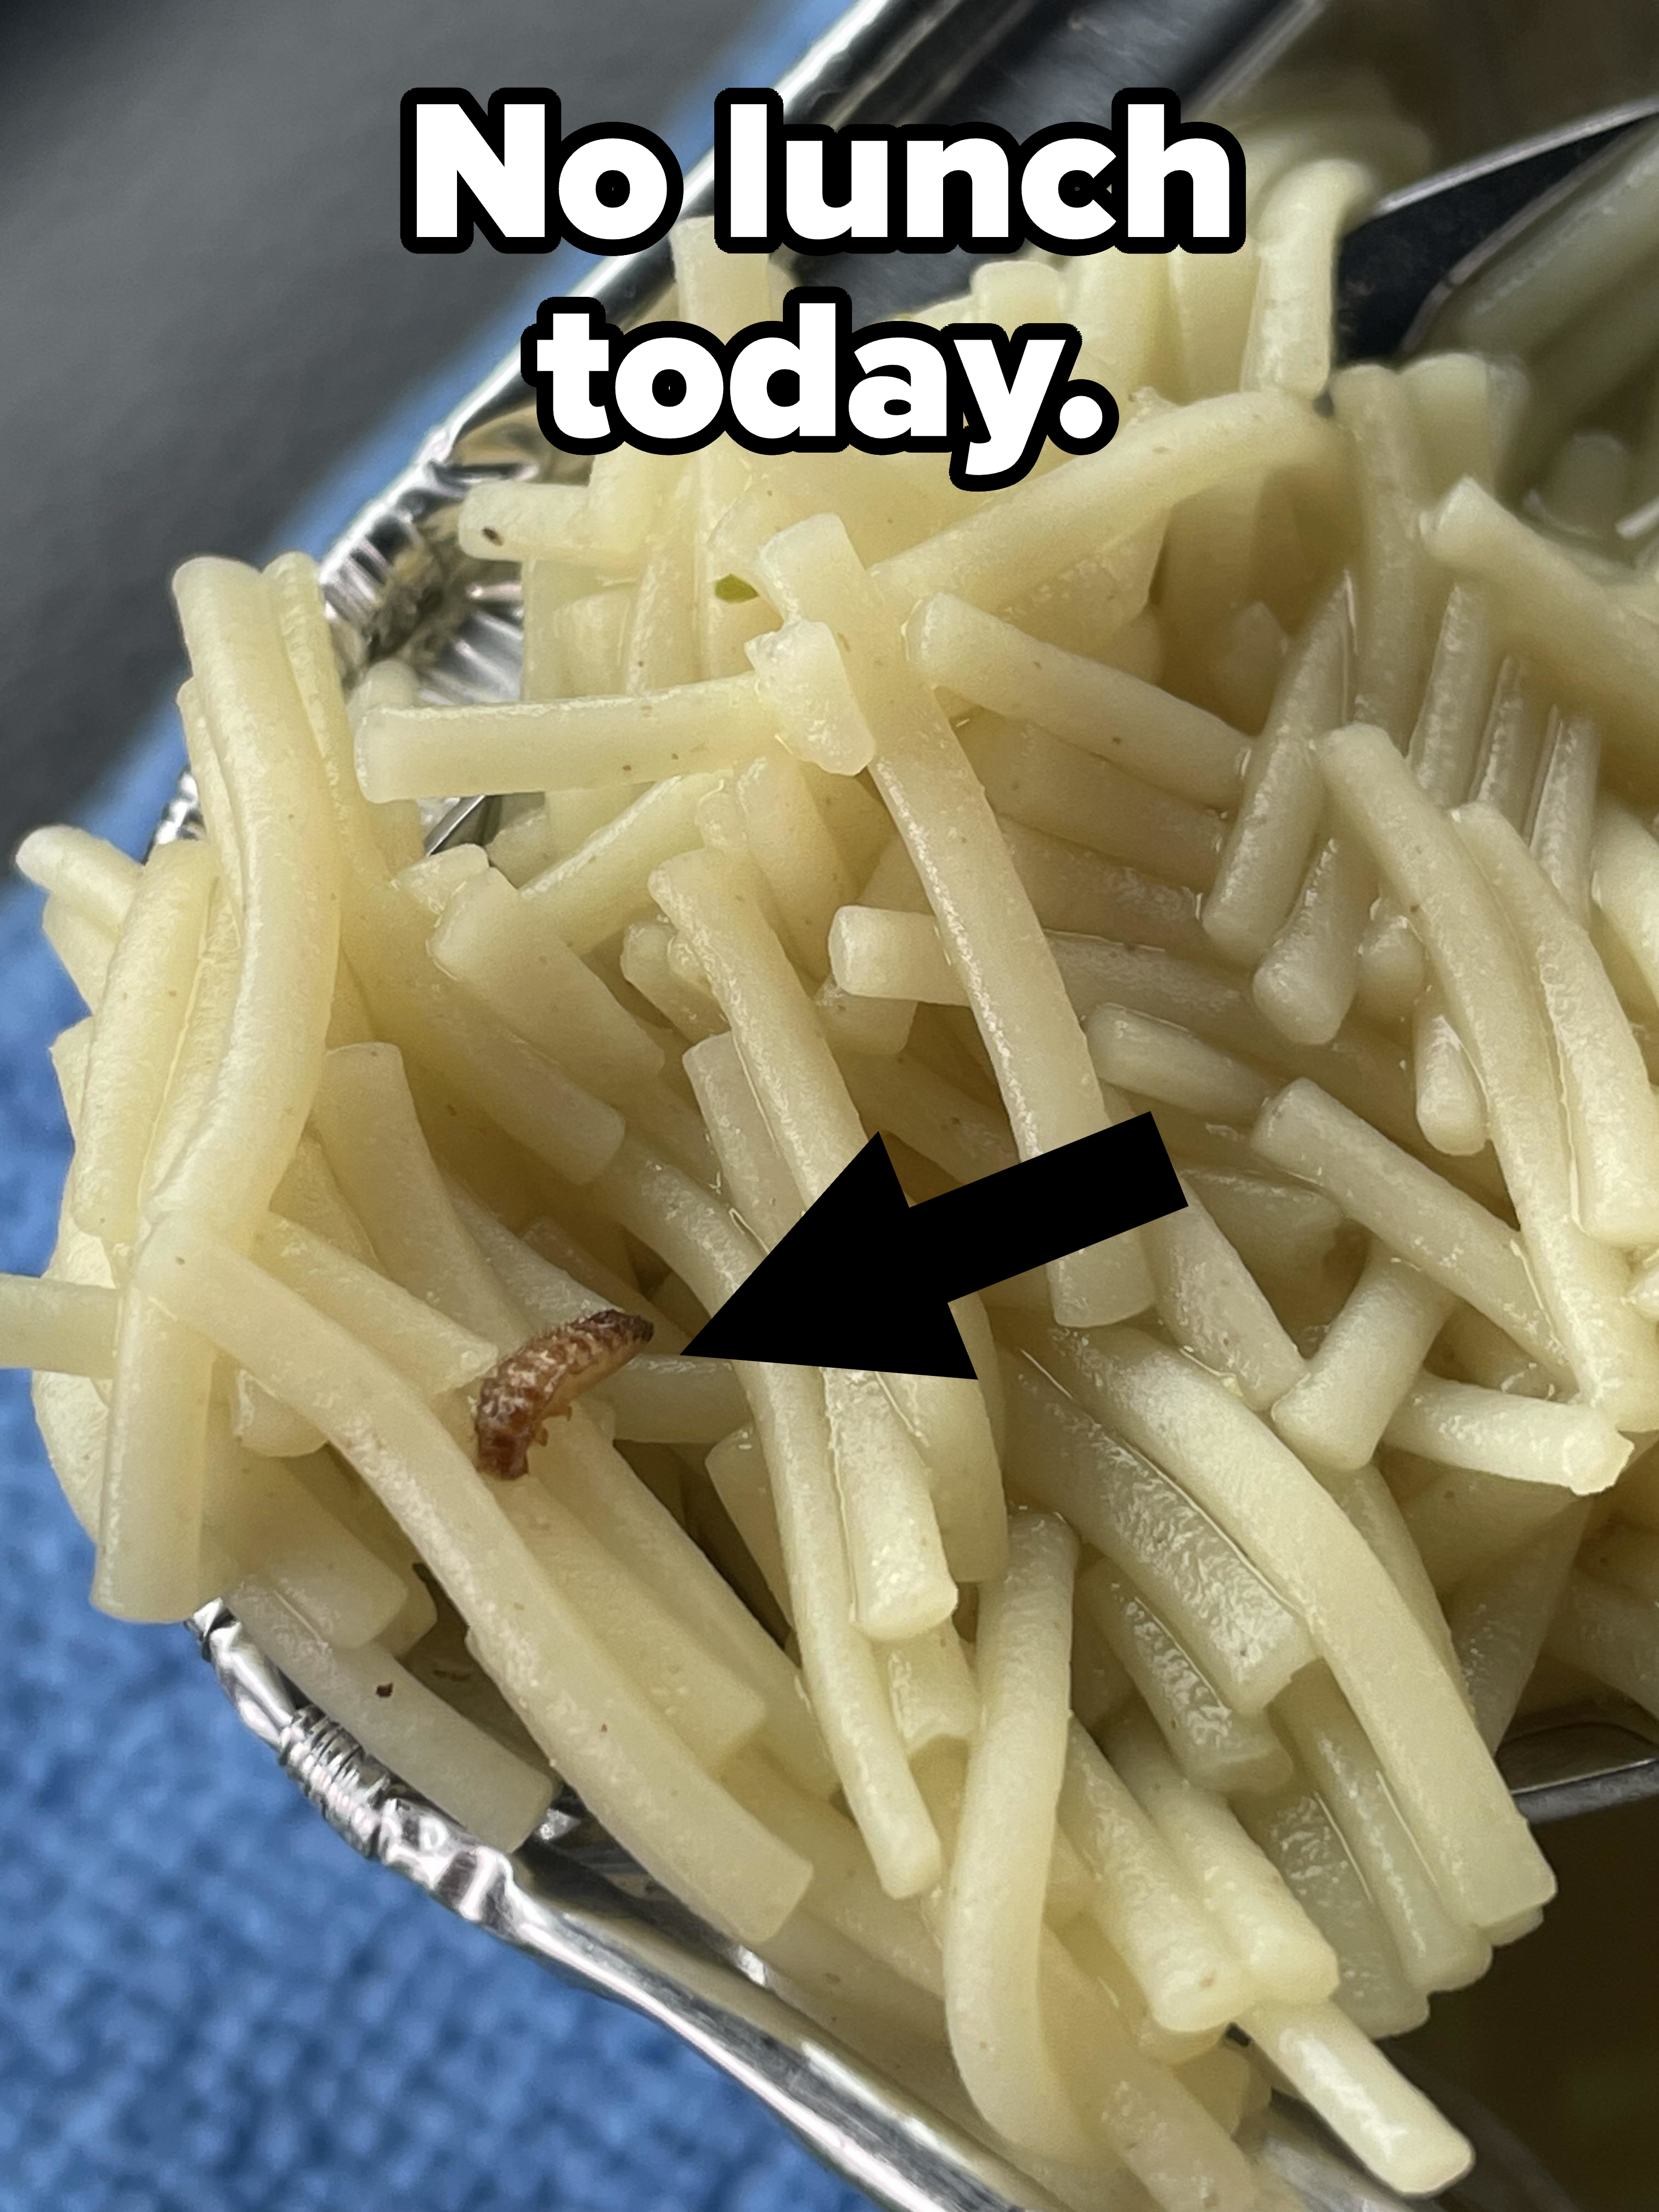 Cooked pasta in a container with a wormy insect visible